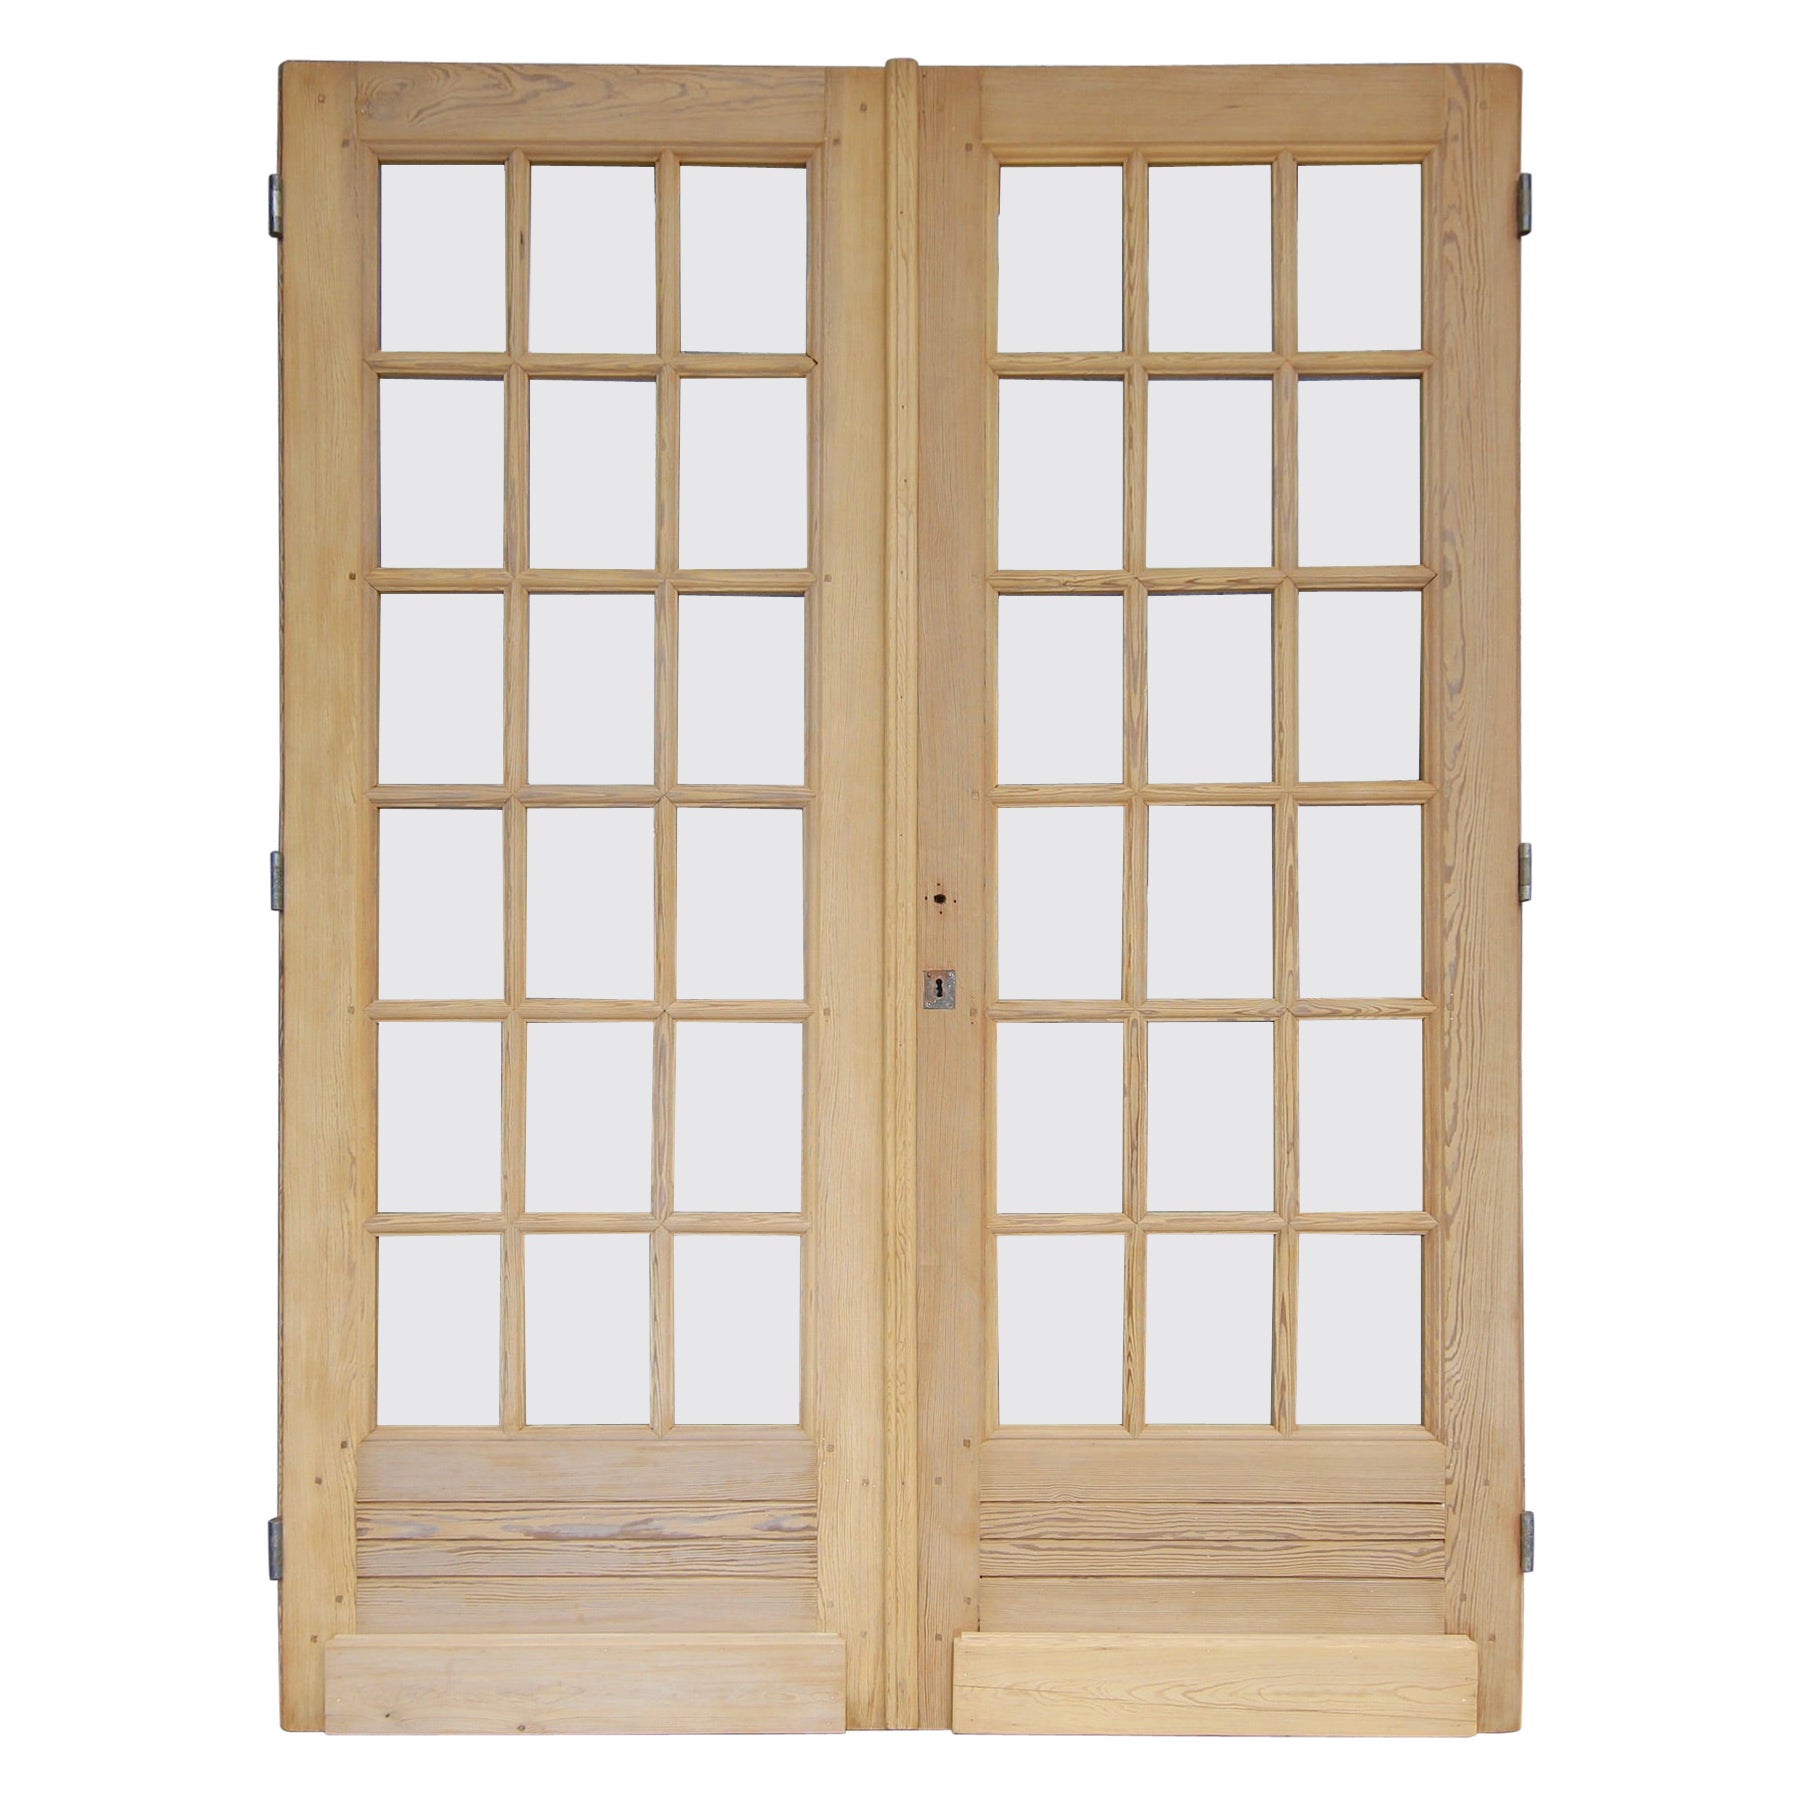 Early 20th Century French Glazed Double Door Made of Pine